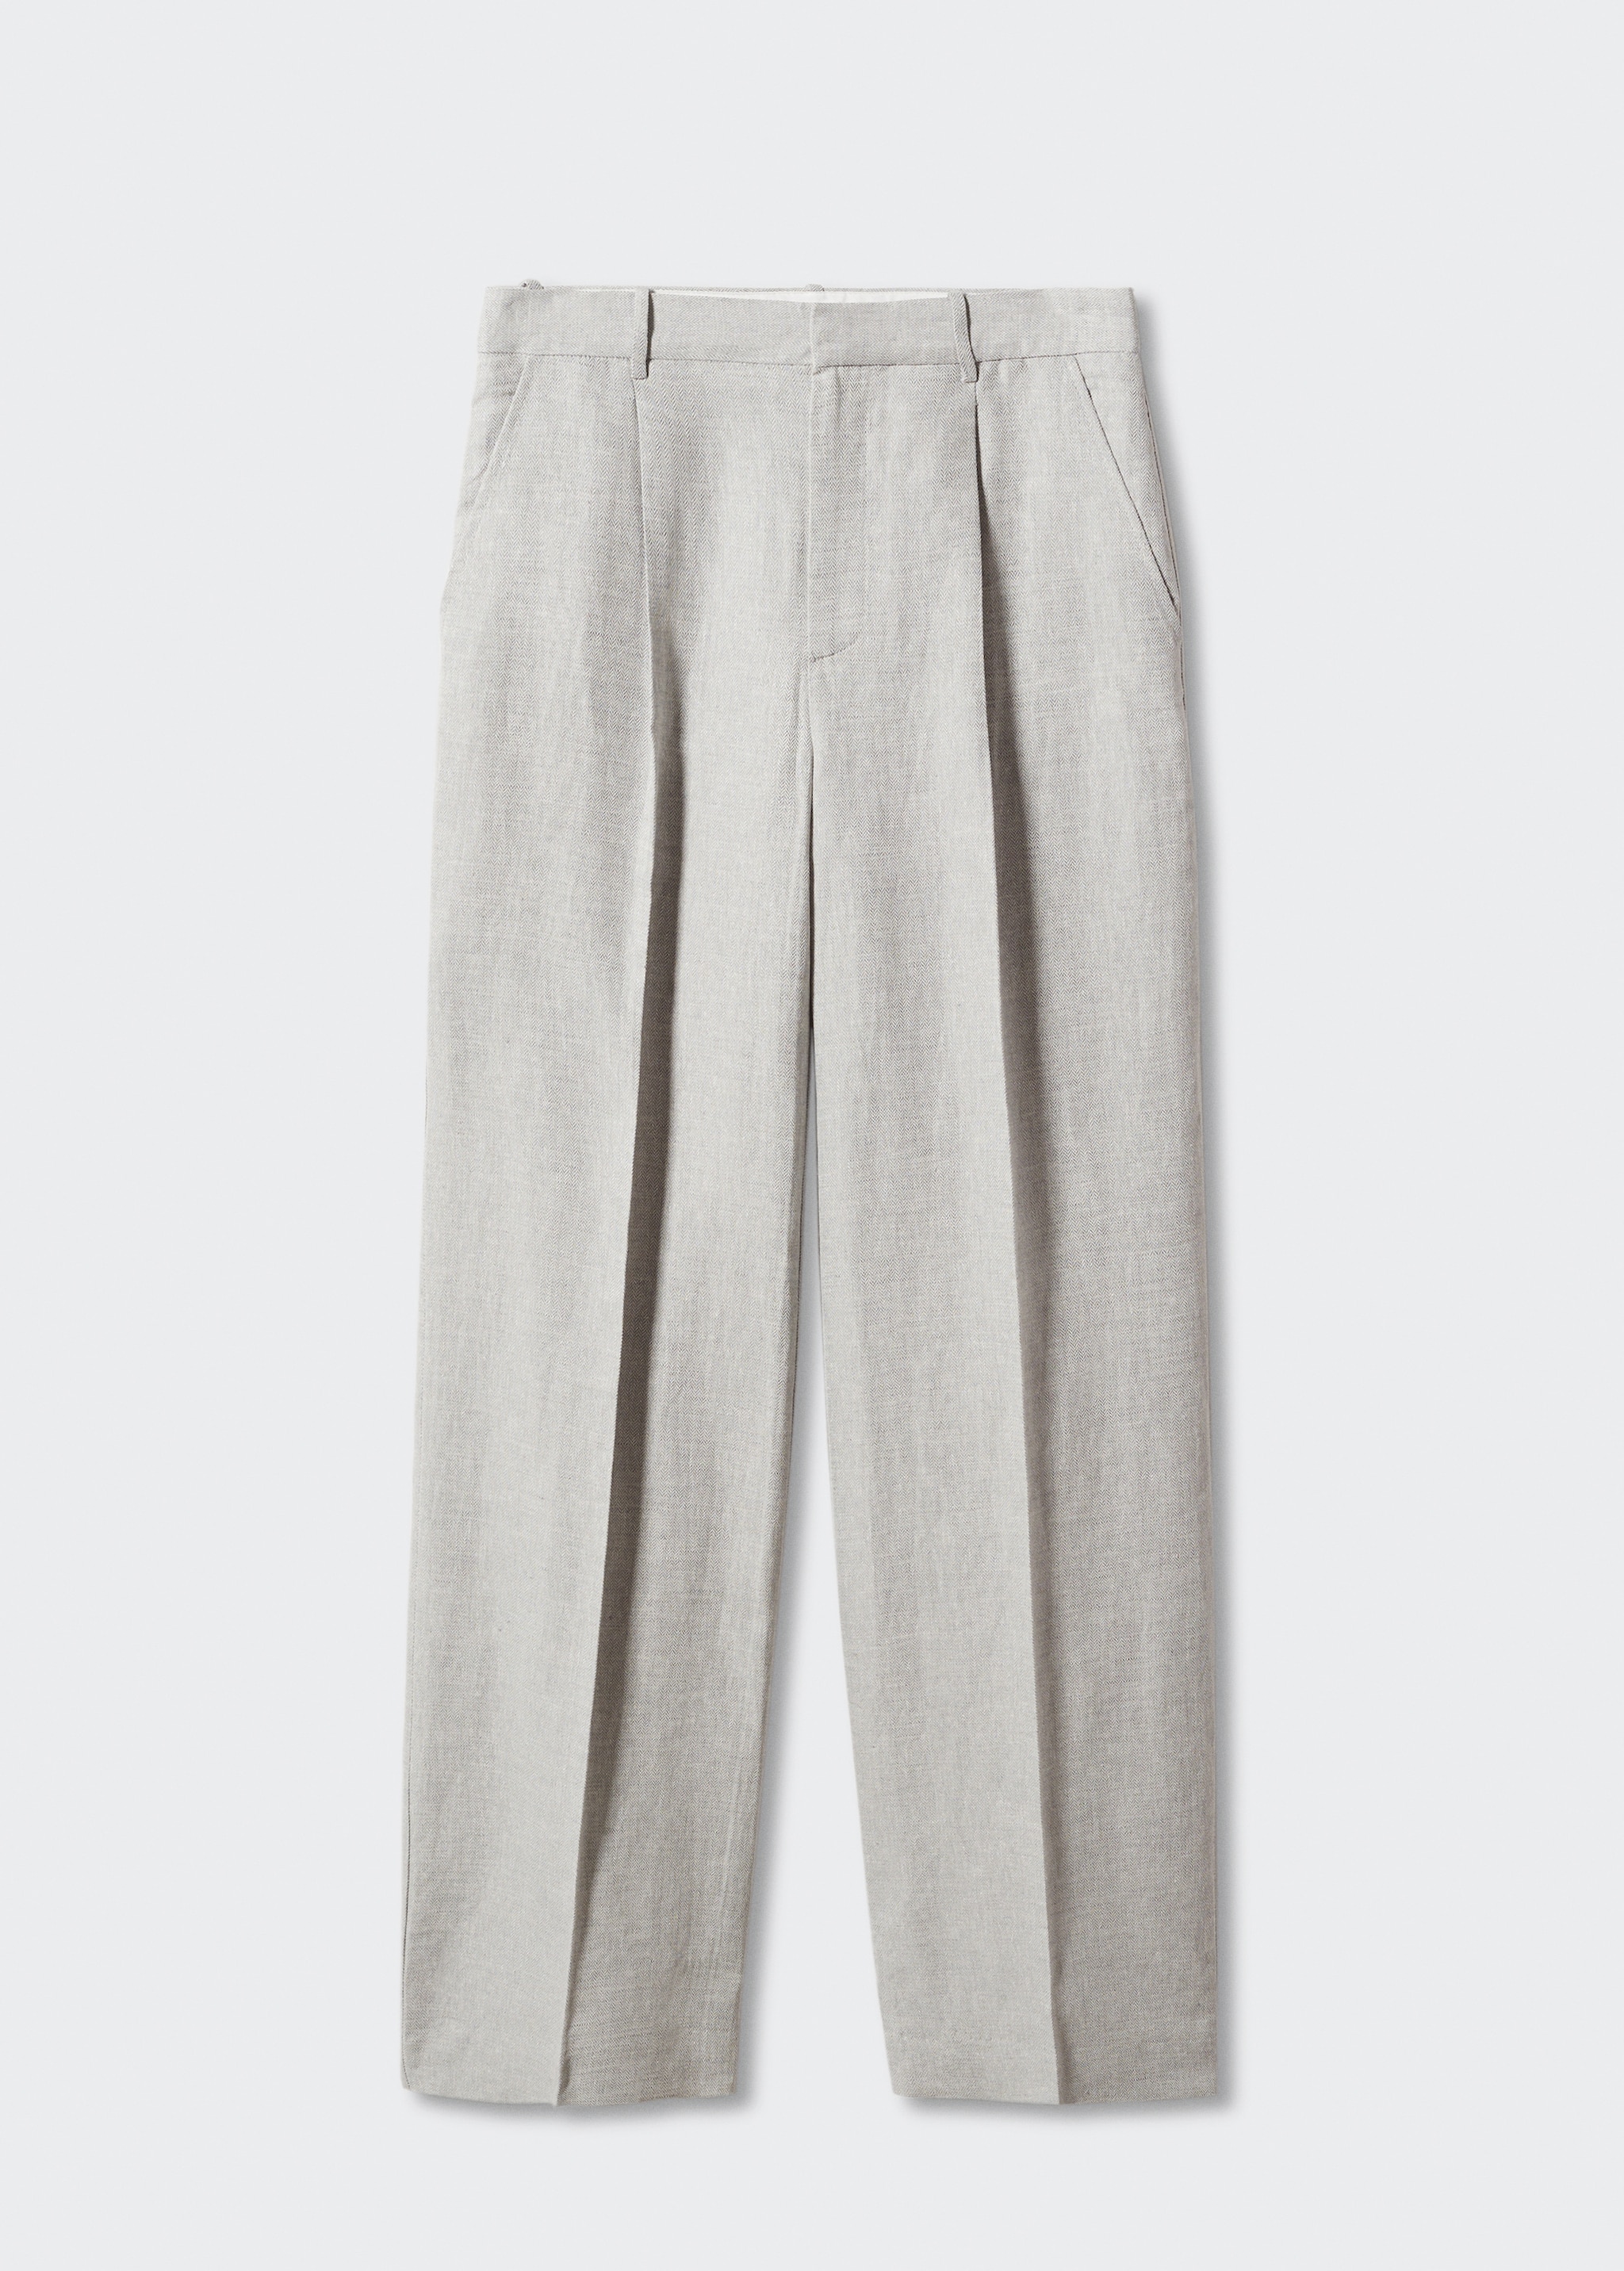 Herringbone linen suit trousers - Article without model